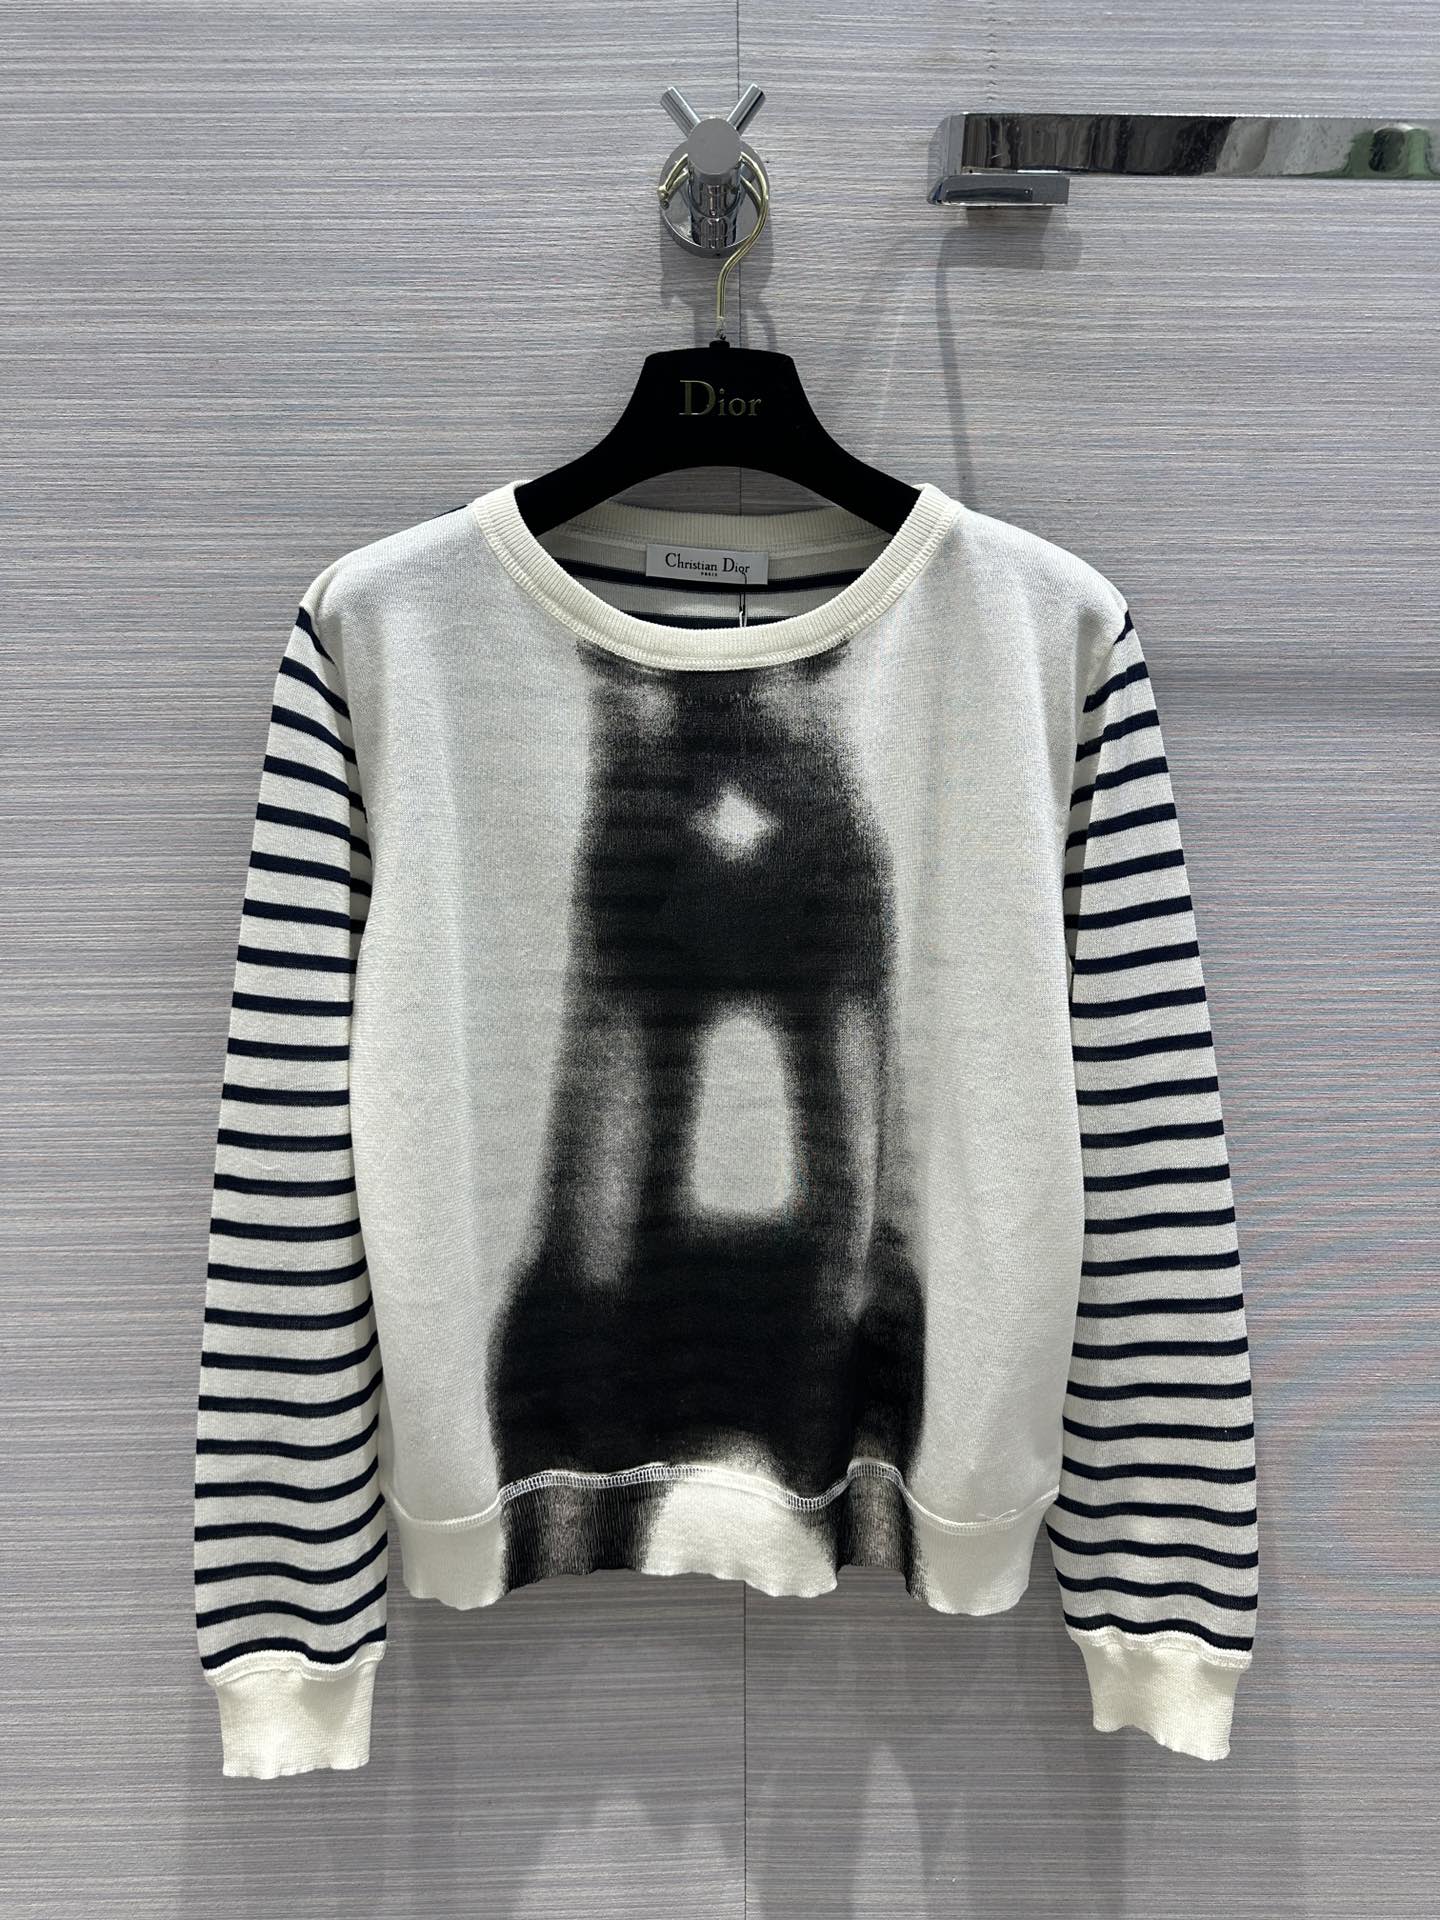 Dior Clothing Knit Sweater White Printing Knitting Linen Spring/Summer Collection